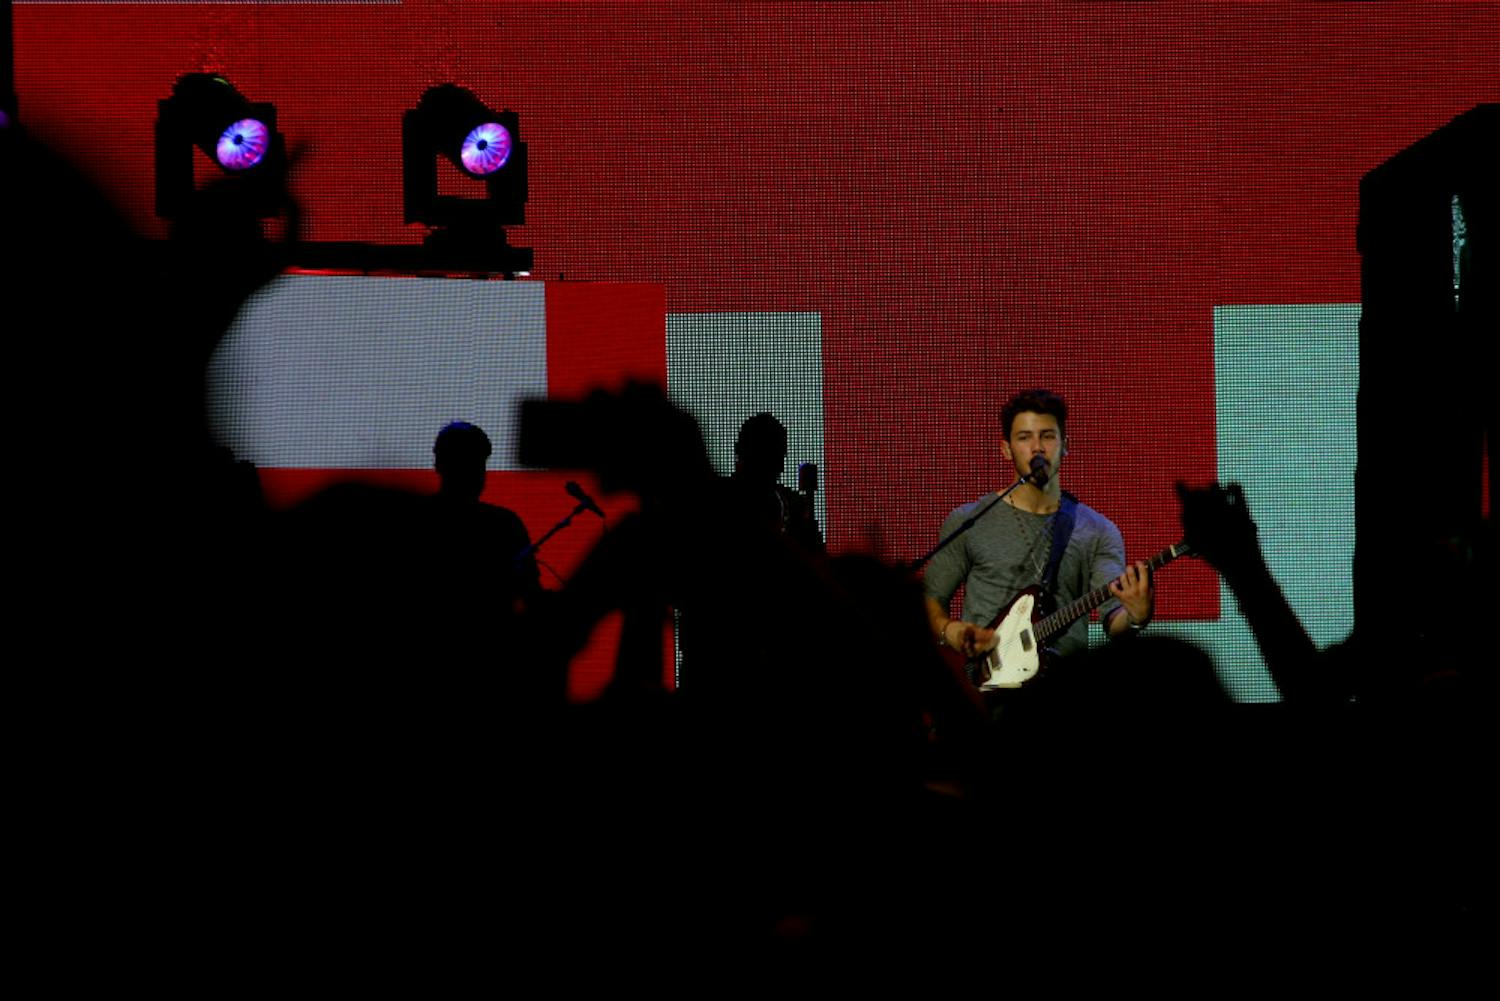 Nick Jonas serenades the cheering crowd at the Jonas Brothers’ concert last week in West Palm Beach. The band recently released new music for the first time in years. 